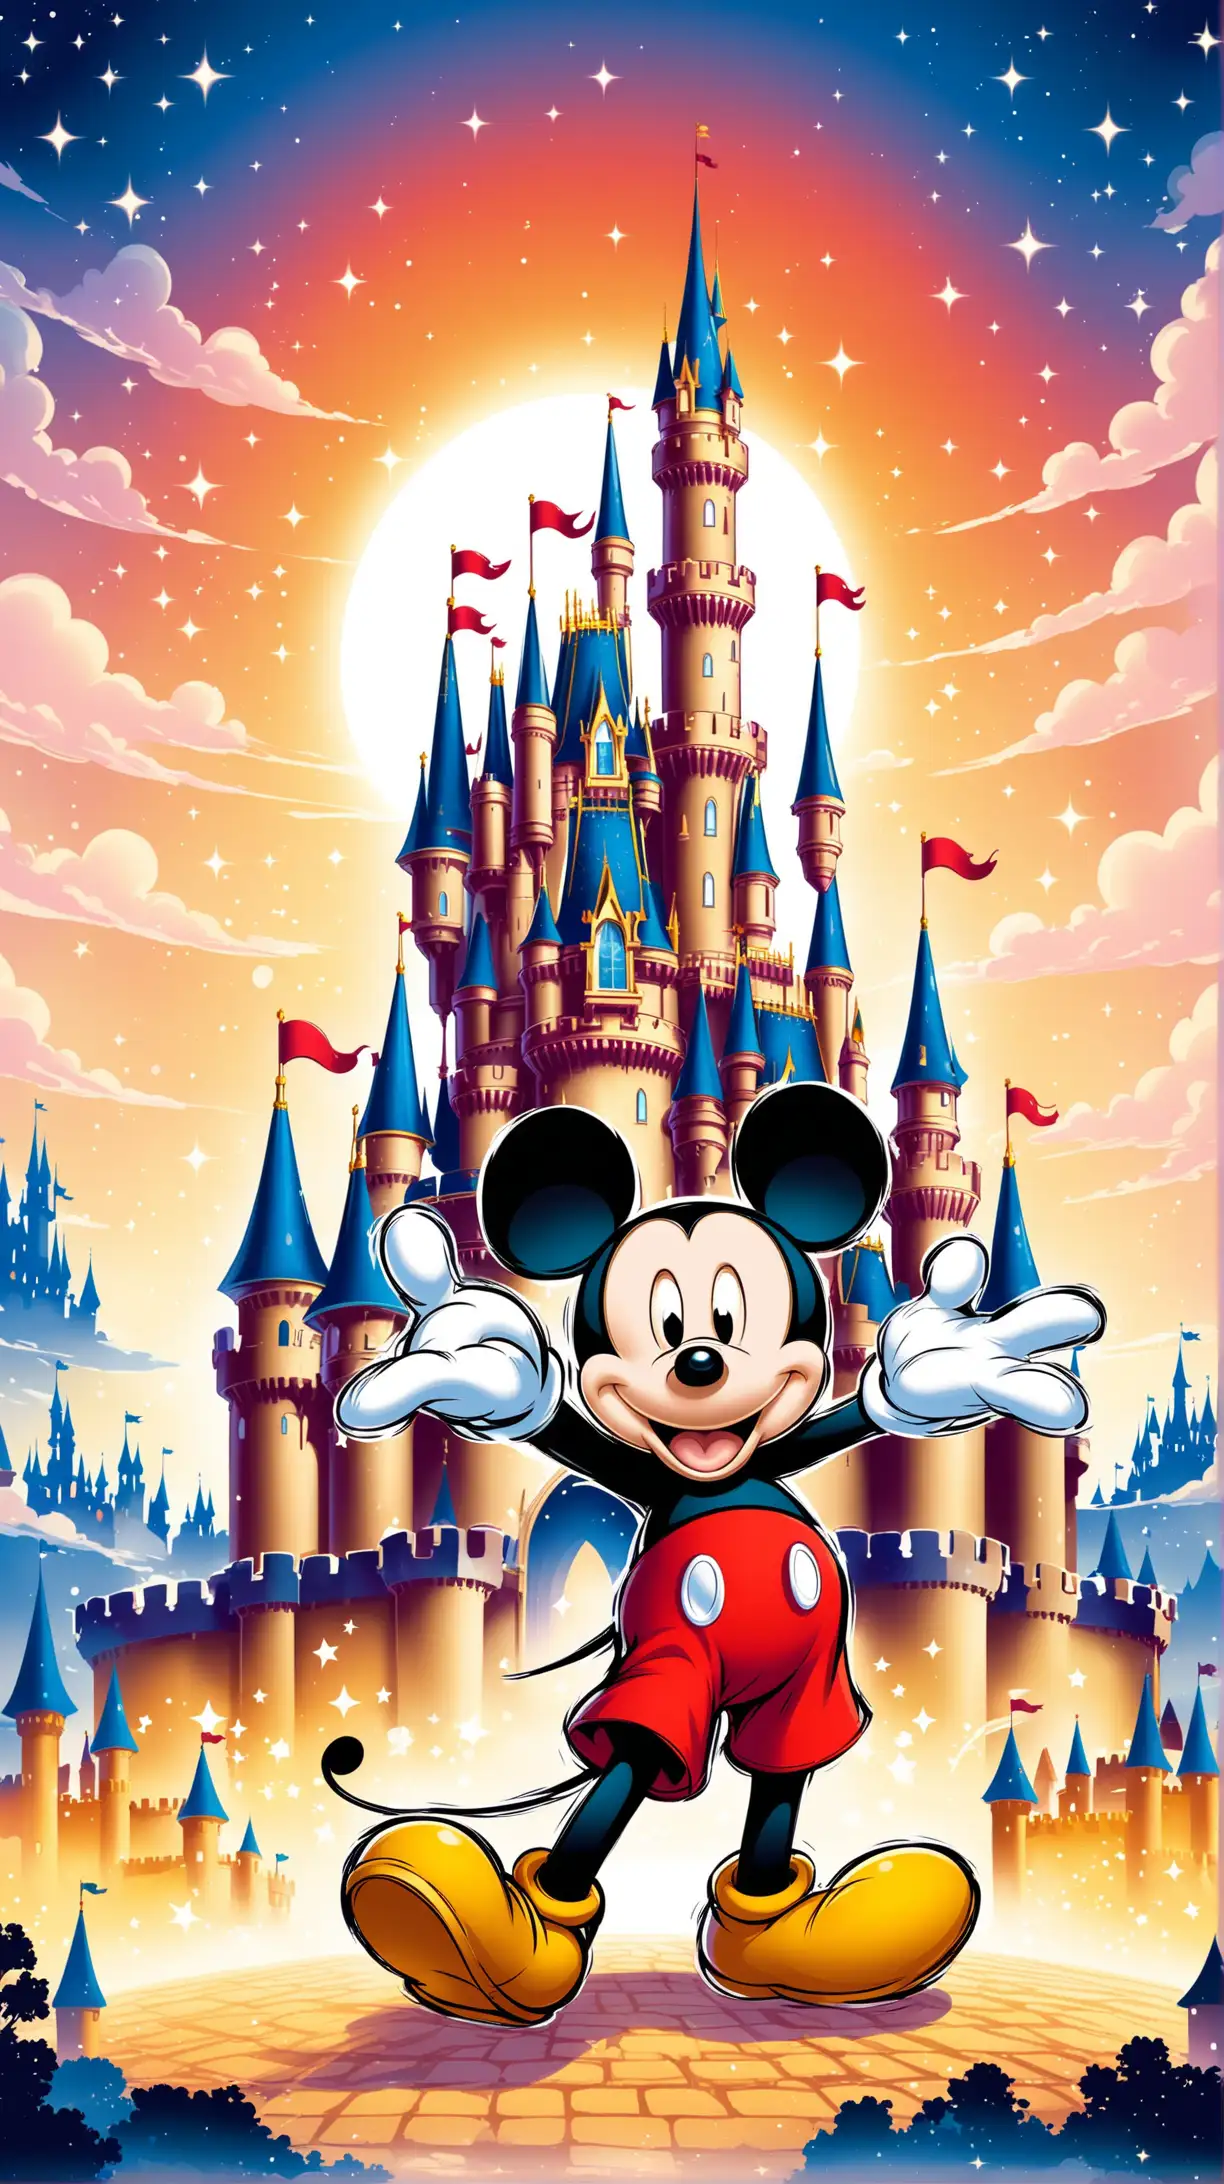 Mickey Mouse Creating Magic with Ink Brush in Enchanted Castle Scene